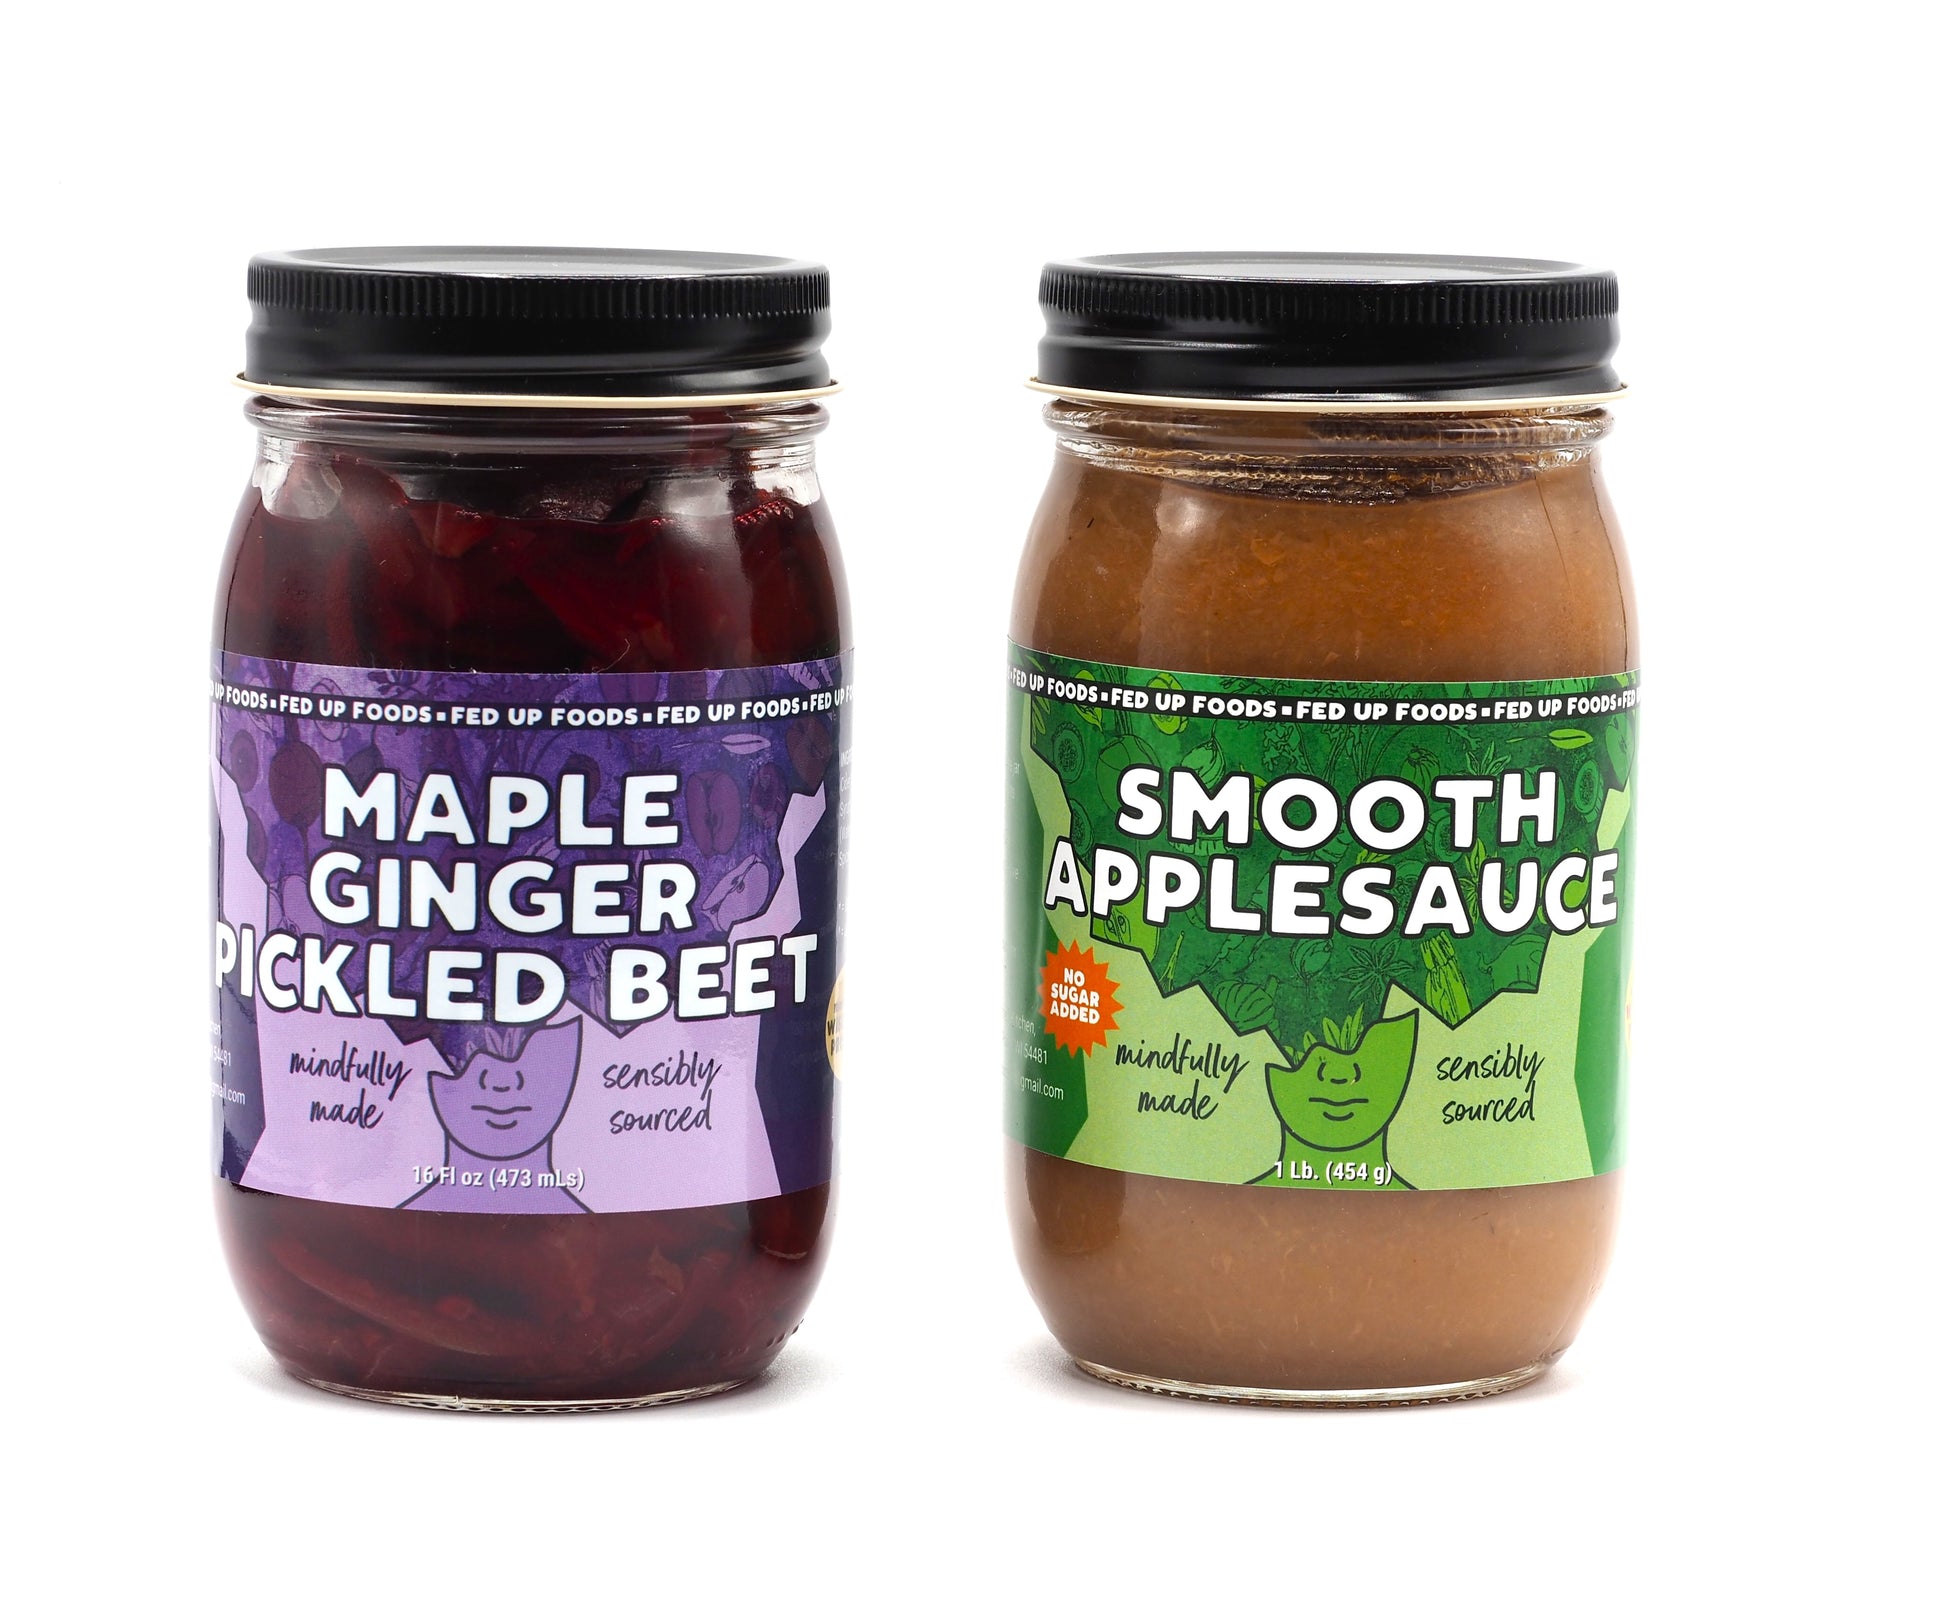 Fed Up Foods Maple Ginger Pickled Beet and Smooth Applesauce in a 2 pack build your own variety pack